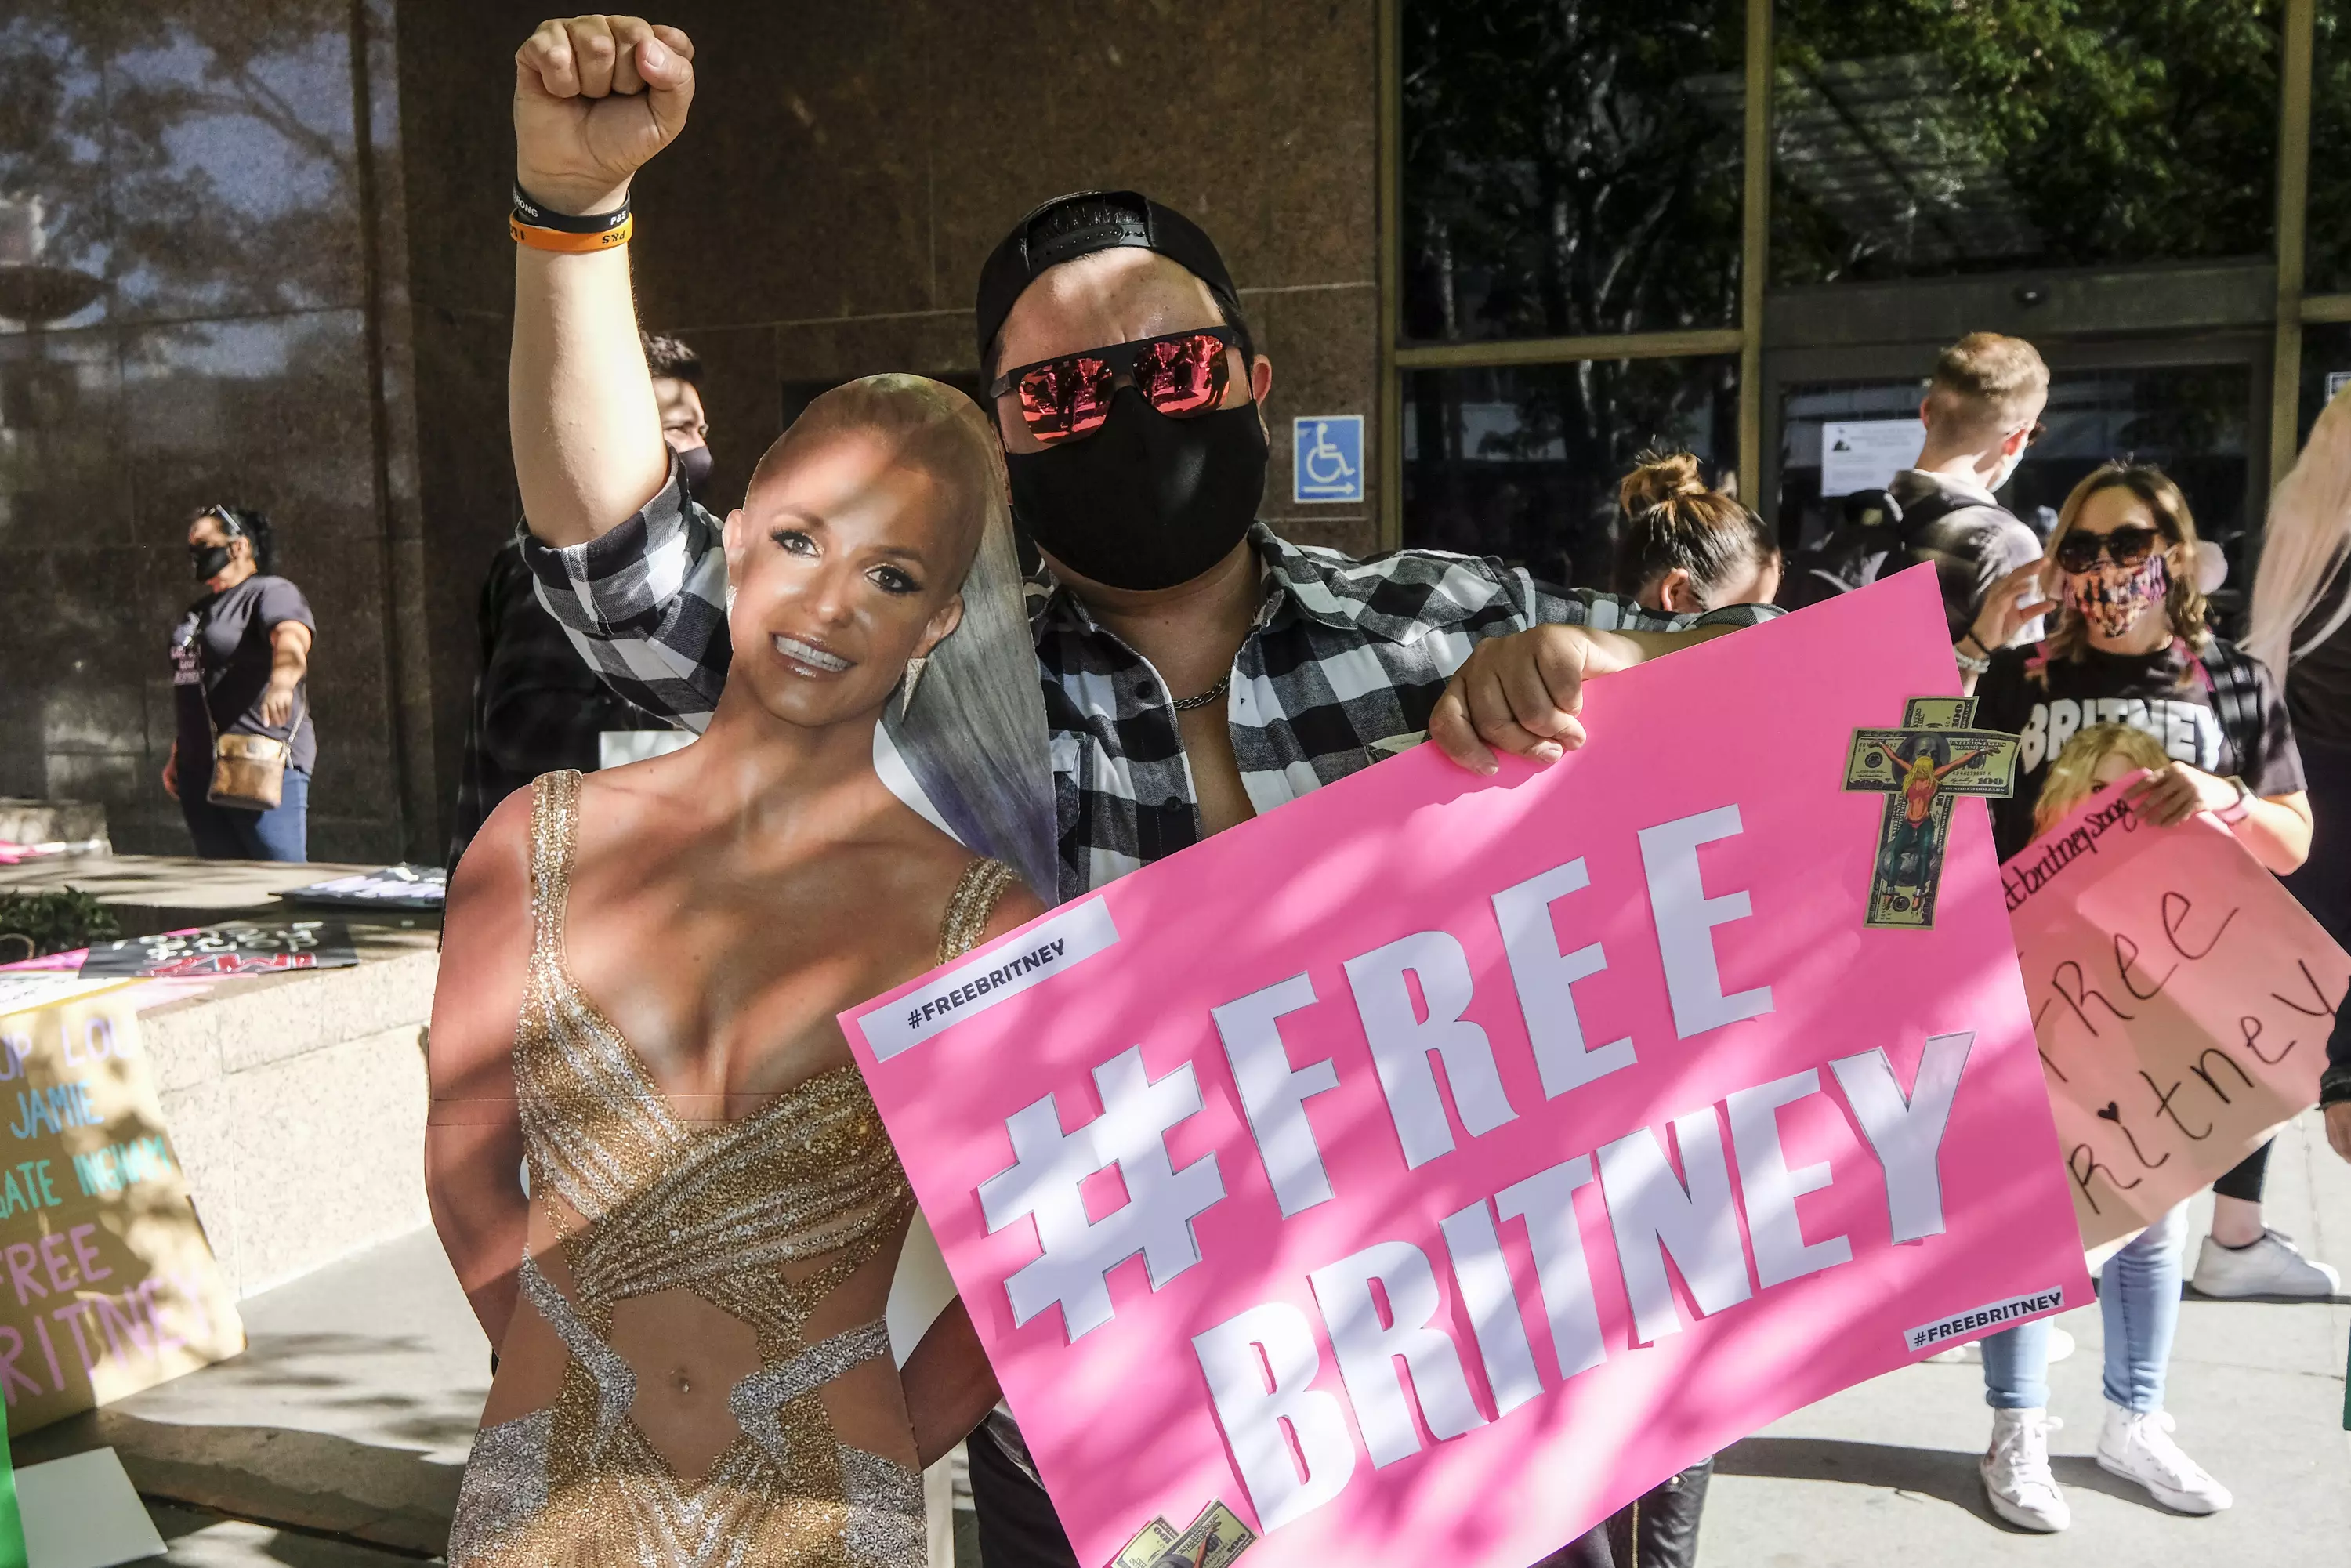 The documentary has revived people's passion to 'Free Britney' (